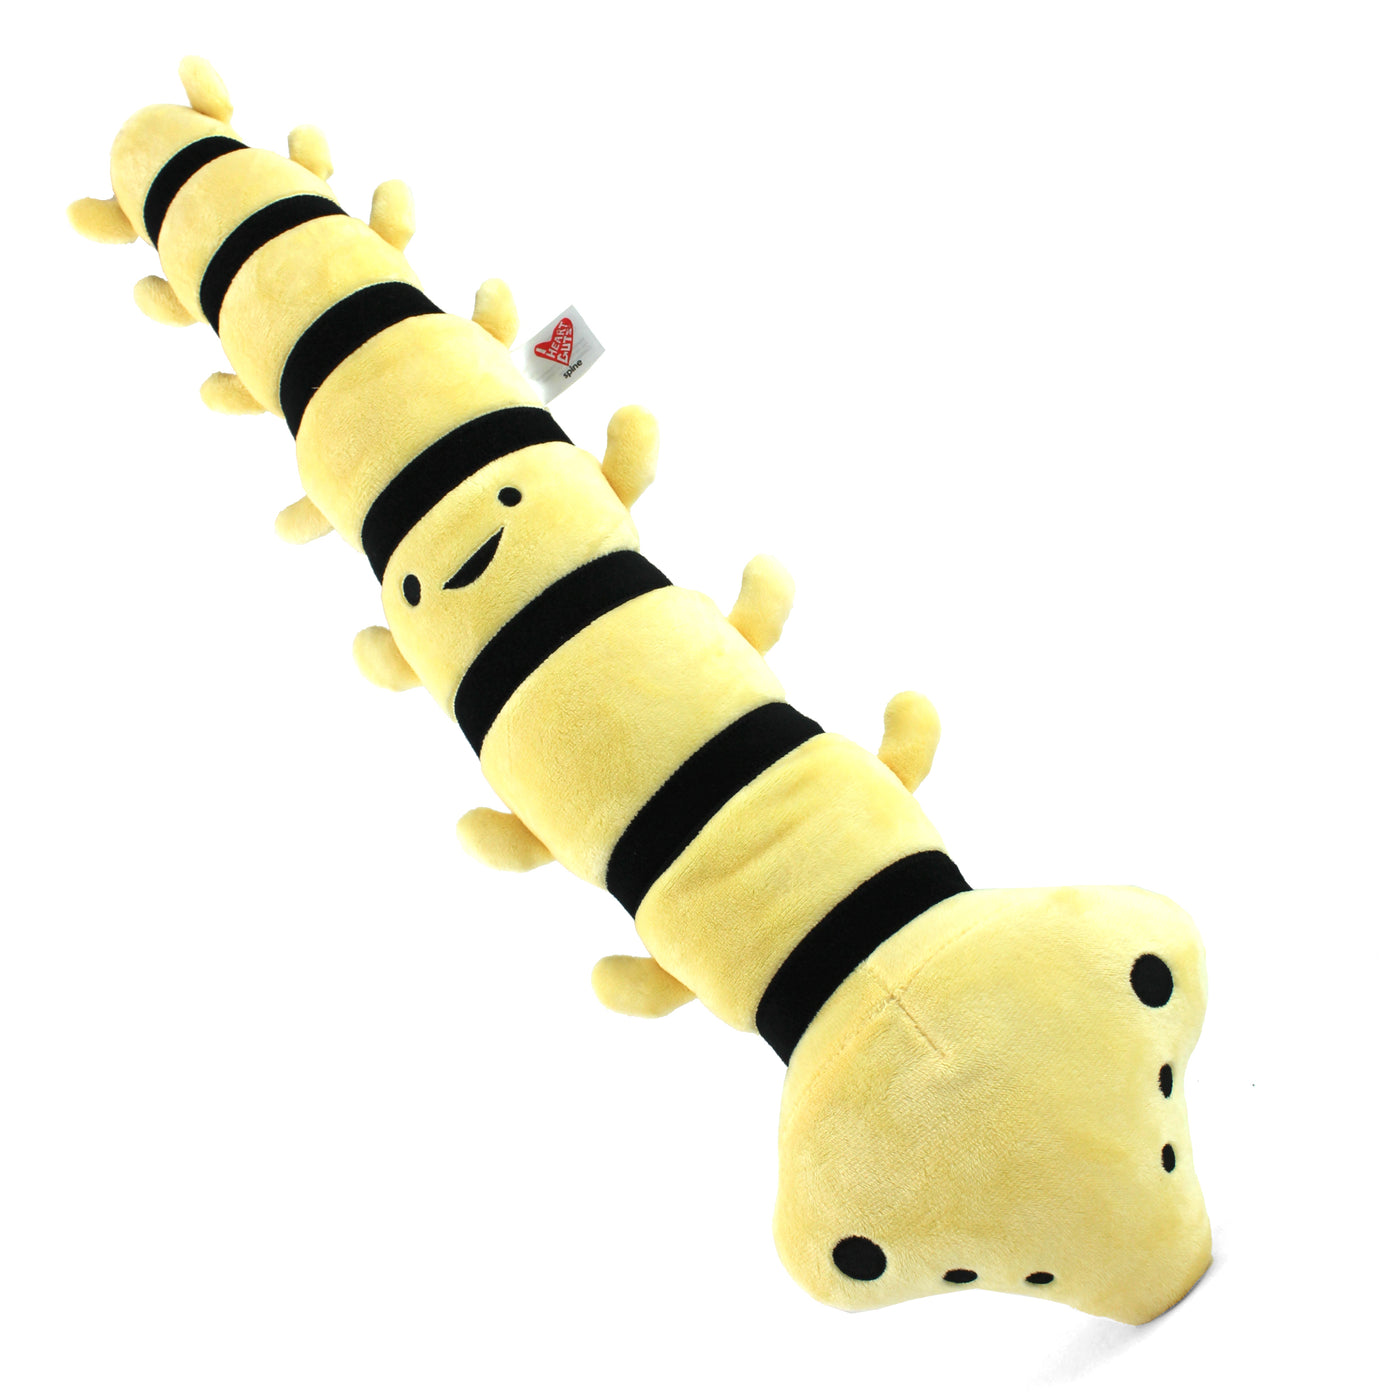 Spine Plush Gifts | Spine Organ Stuffed Animals, Cute Spine Organ Plushies, and Spine Enamel Pins | I Heart Guts